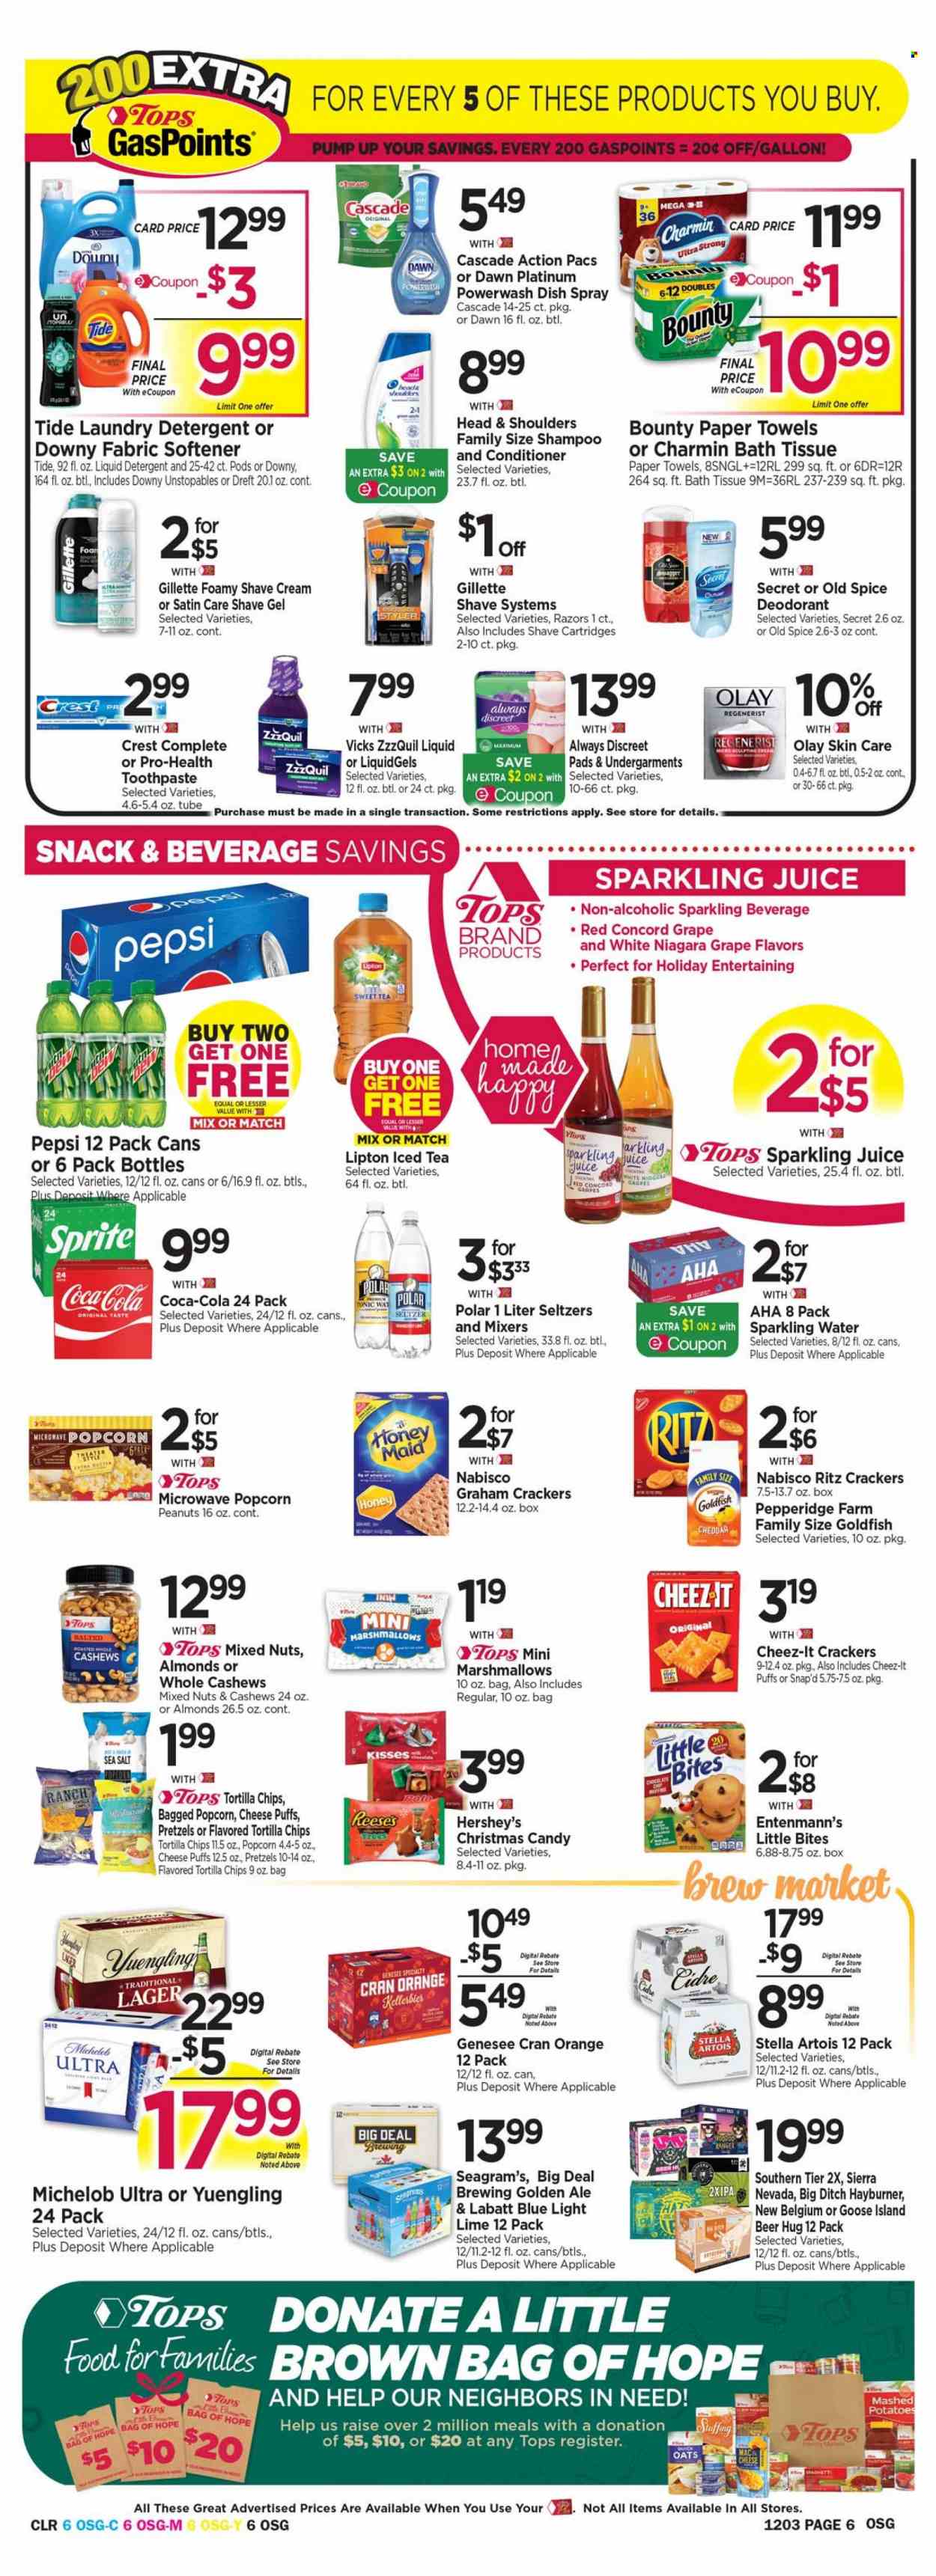 thumbnail - Tops Flyer - 11/27/2022 - 12/03/2022 - Sales products - pretzels, puffs, muffin, Entenmann's, oranges, mashed potatoes, spaghetti, butter, Reese's, Hershey's, graham crackers, marshmallows, snack, Bounty, Mars, crackers, Little Bites, RITZ, tortilla chips, chips, popcorn, Goldfish, Cheez-It, oats, Quick Oats, Honey Maid, spice, almonds, cashews, peanuts, mixed nuts, Coca-Cola, Sprite, Pepsi, juice, Lipton, ice tea, tonic, sparkling juice, seltzer water, sparkling water, beer, Lager, bath tissue, toilet paper, kitchen towels, paper towels, Charmin, detergent, Cascade, Tide, Unstopables, fabric softener, liquid detergent, laundry detergent, Downy Laundry, shampoo, Old Spice, toothpaste, Crest, Always Discreet, Olay, conditioner, Head & Shoulders, Gillette, shave gel, shave cream, Stella Artois, Yuengling, Michelob. Page 6.